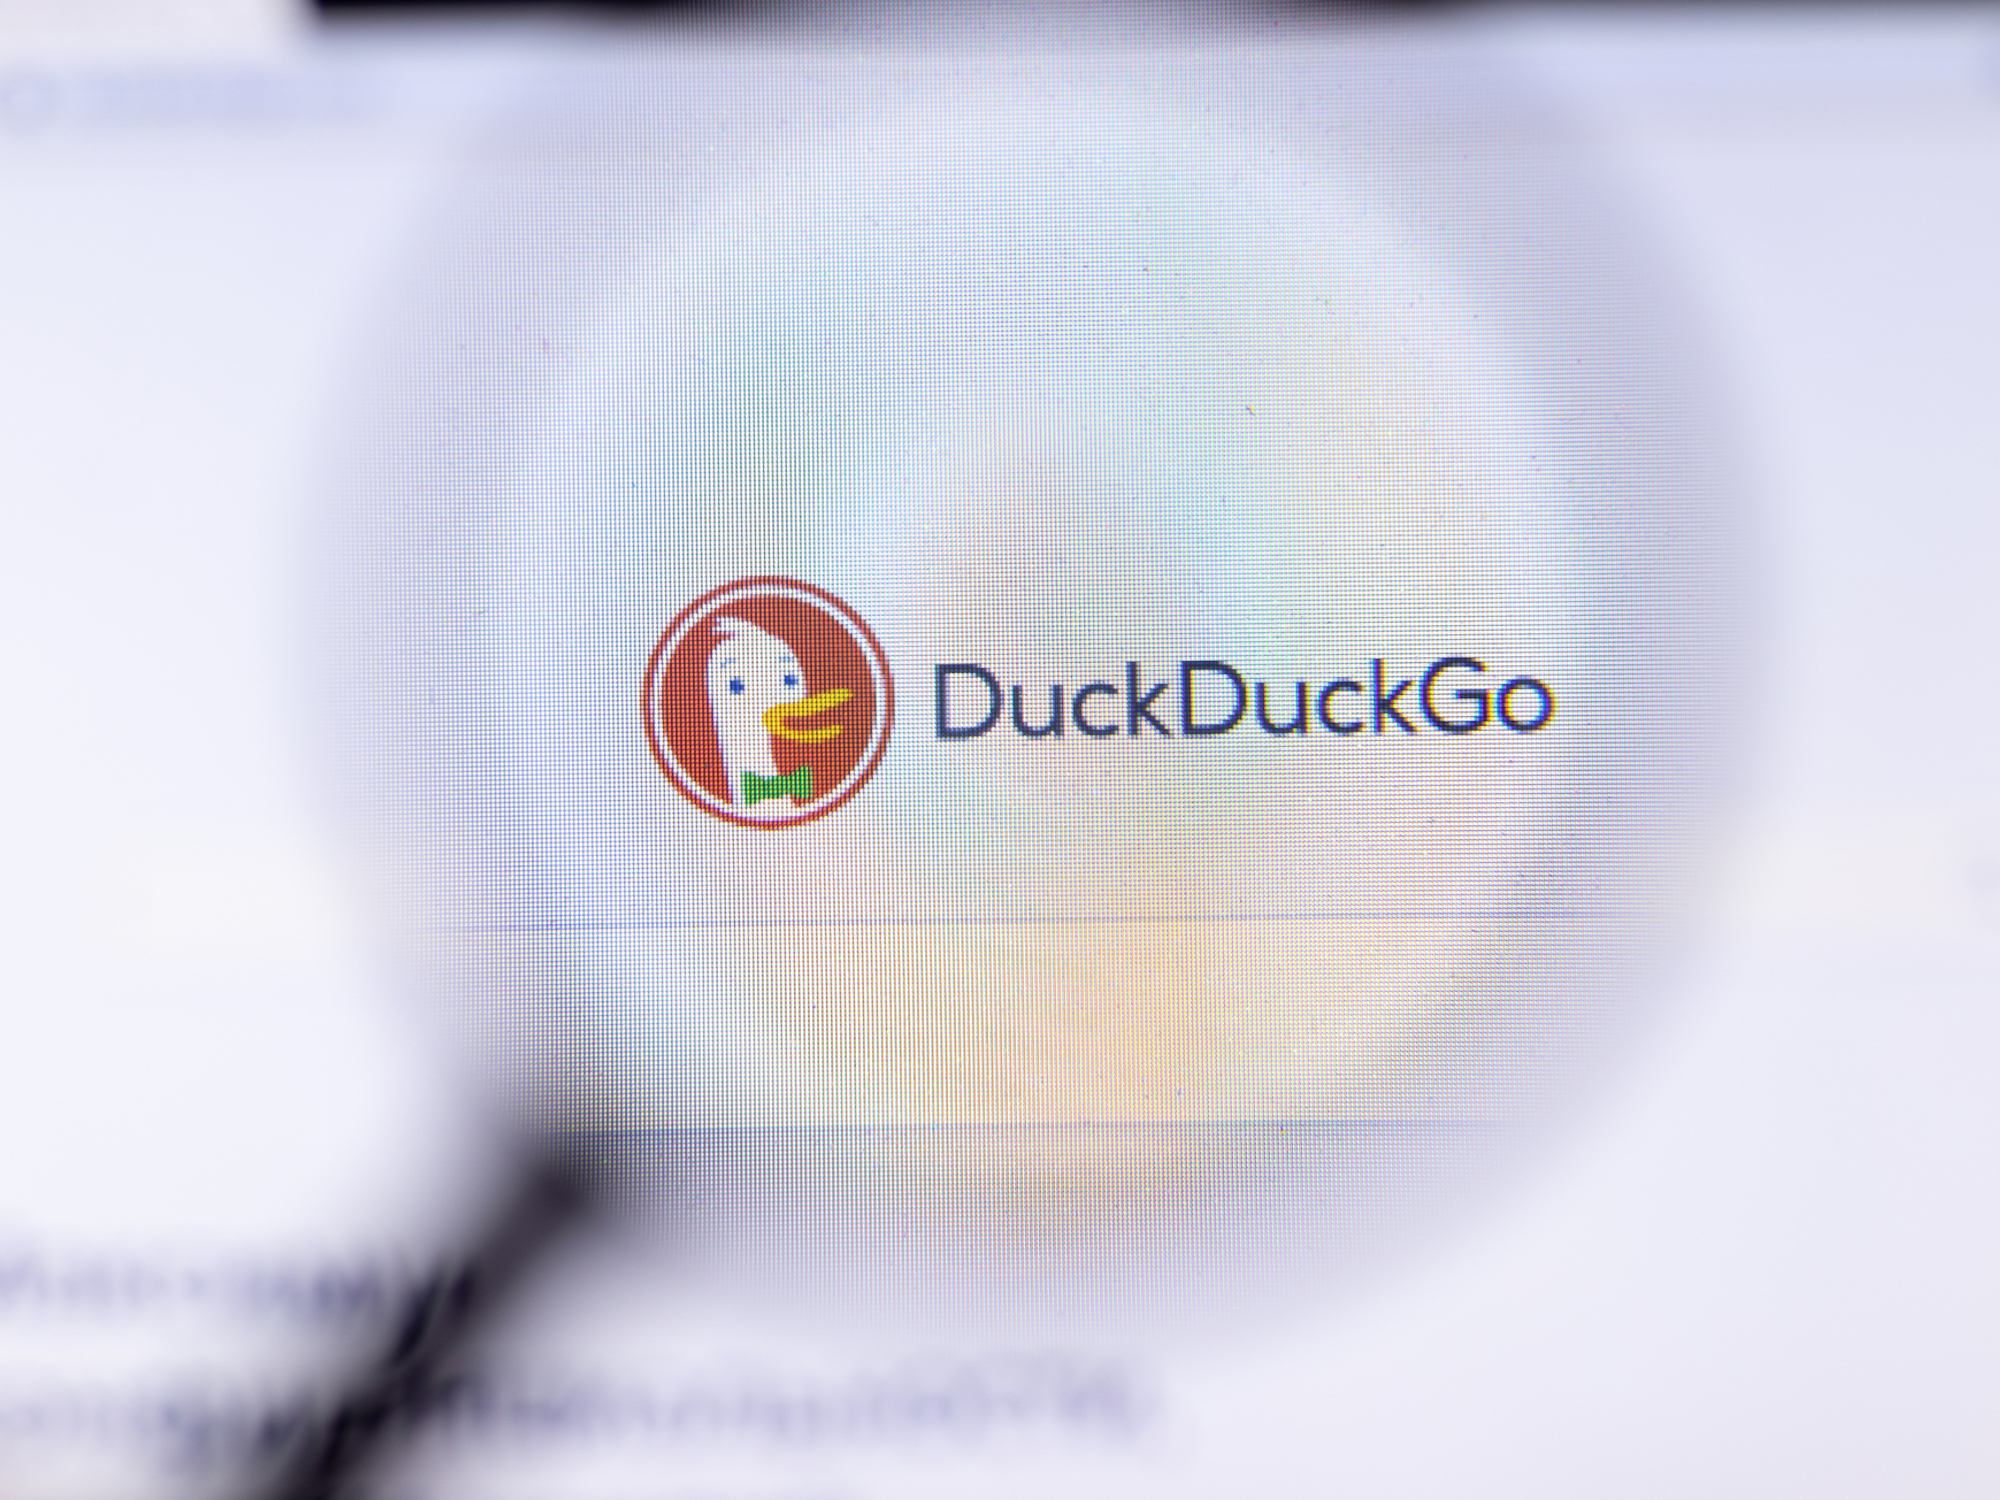 Anyone can now sign up for DuckDuckGo’s private email service